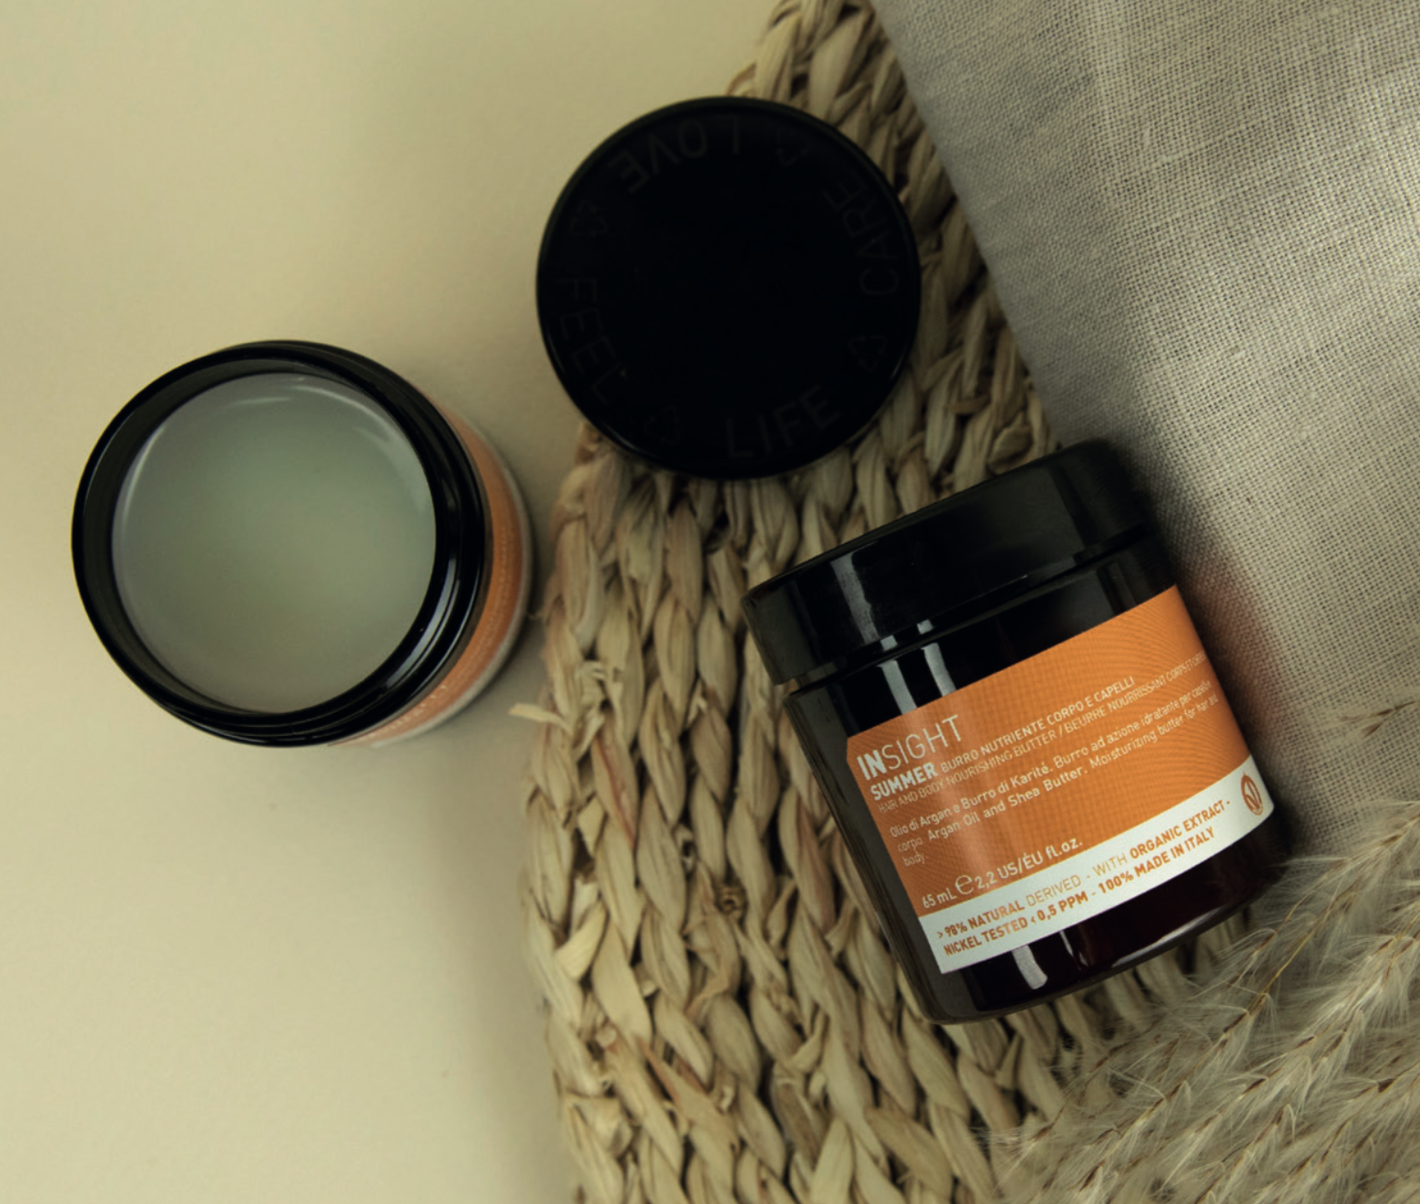 Summer Experience Nourishing Hair and body butter